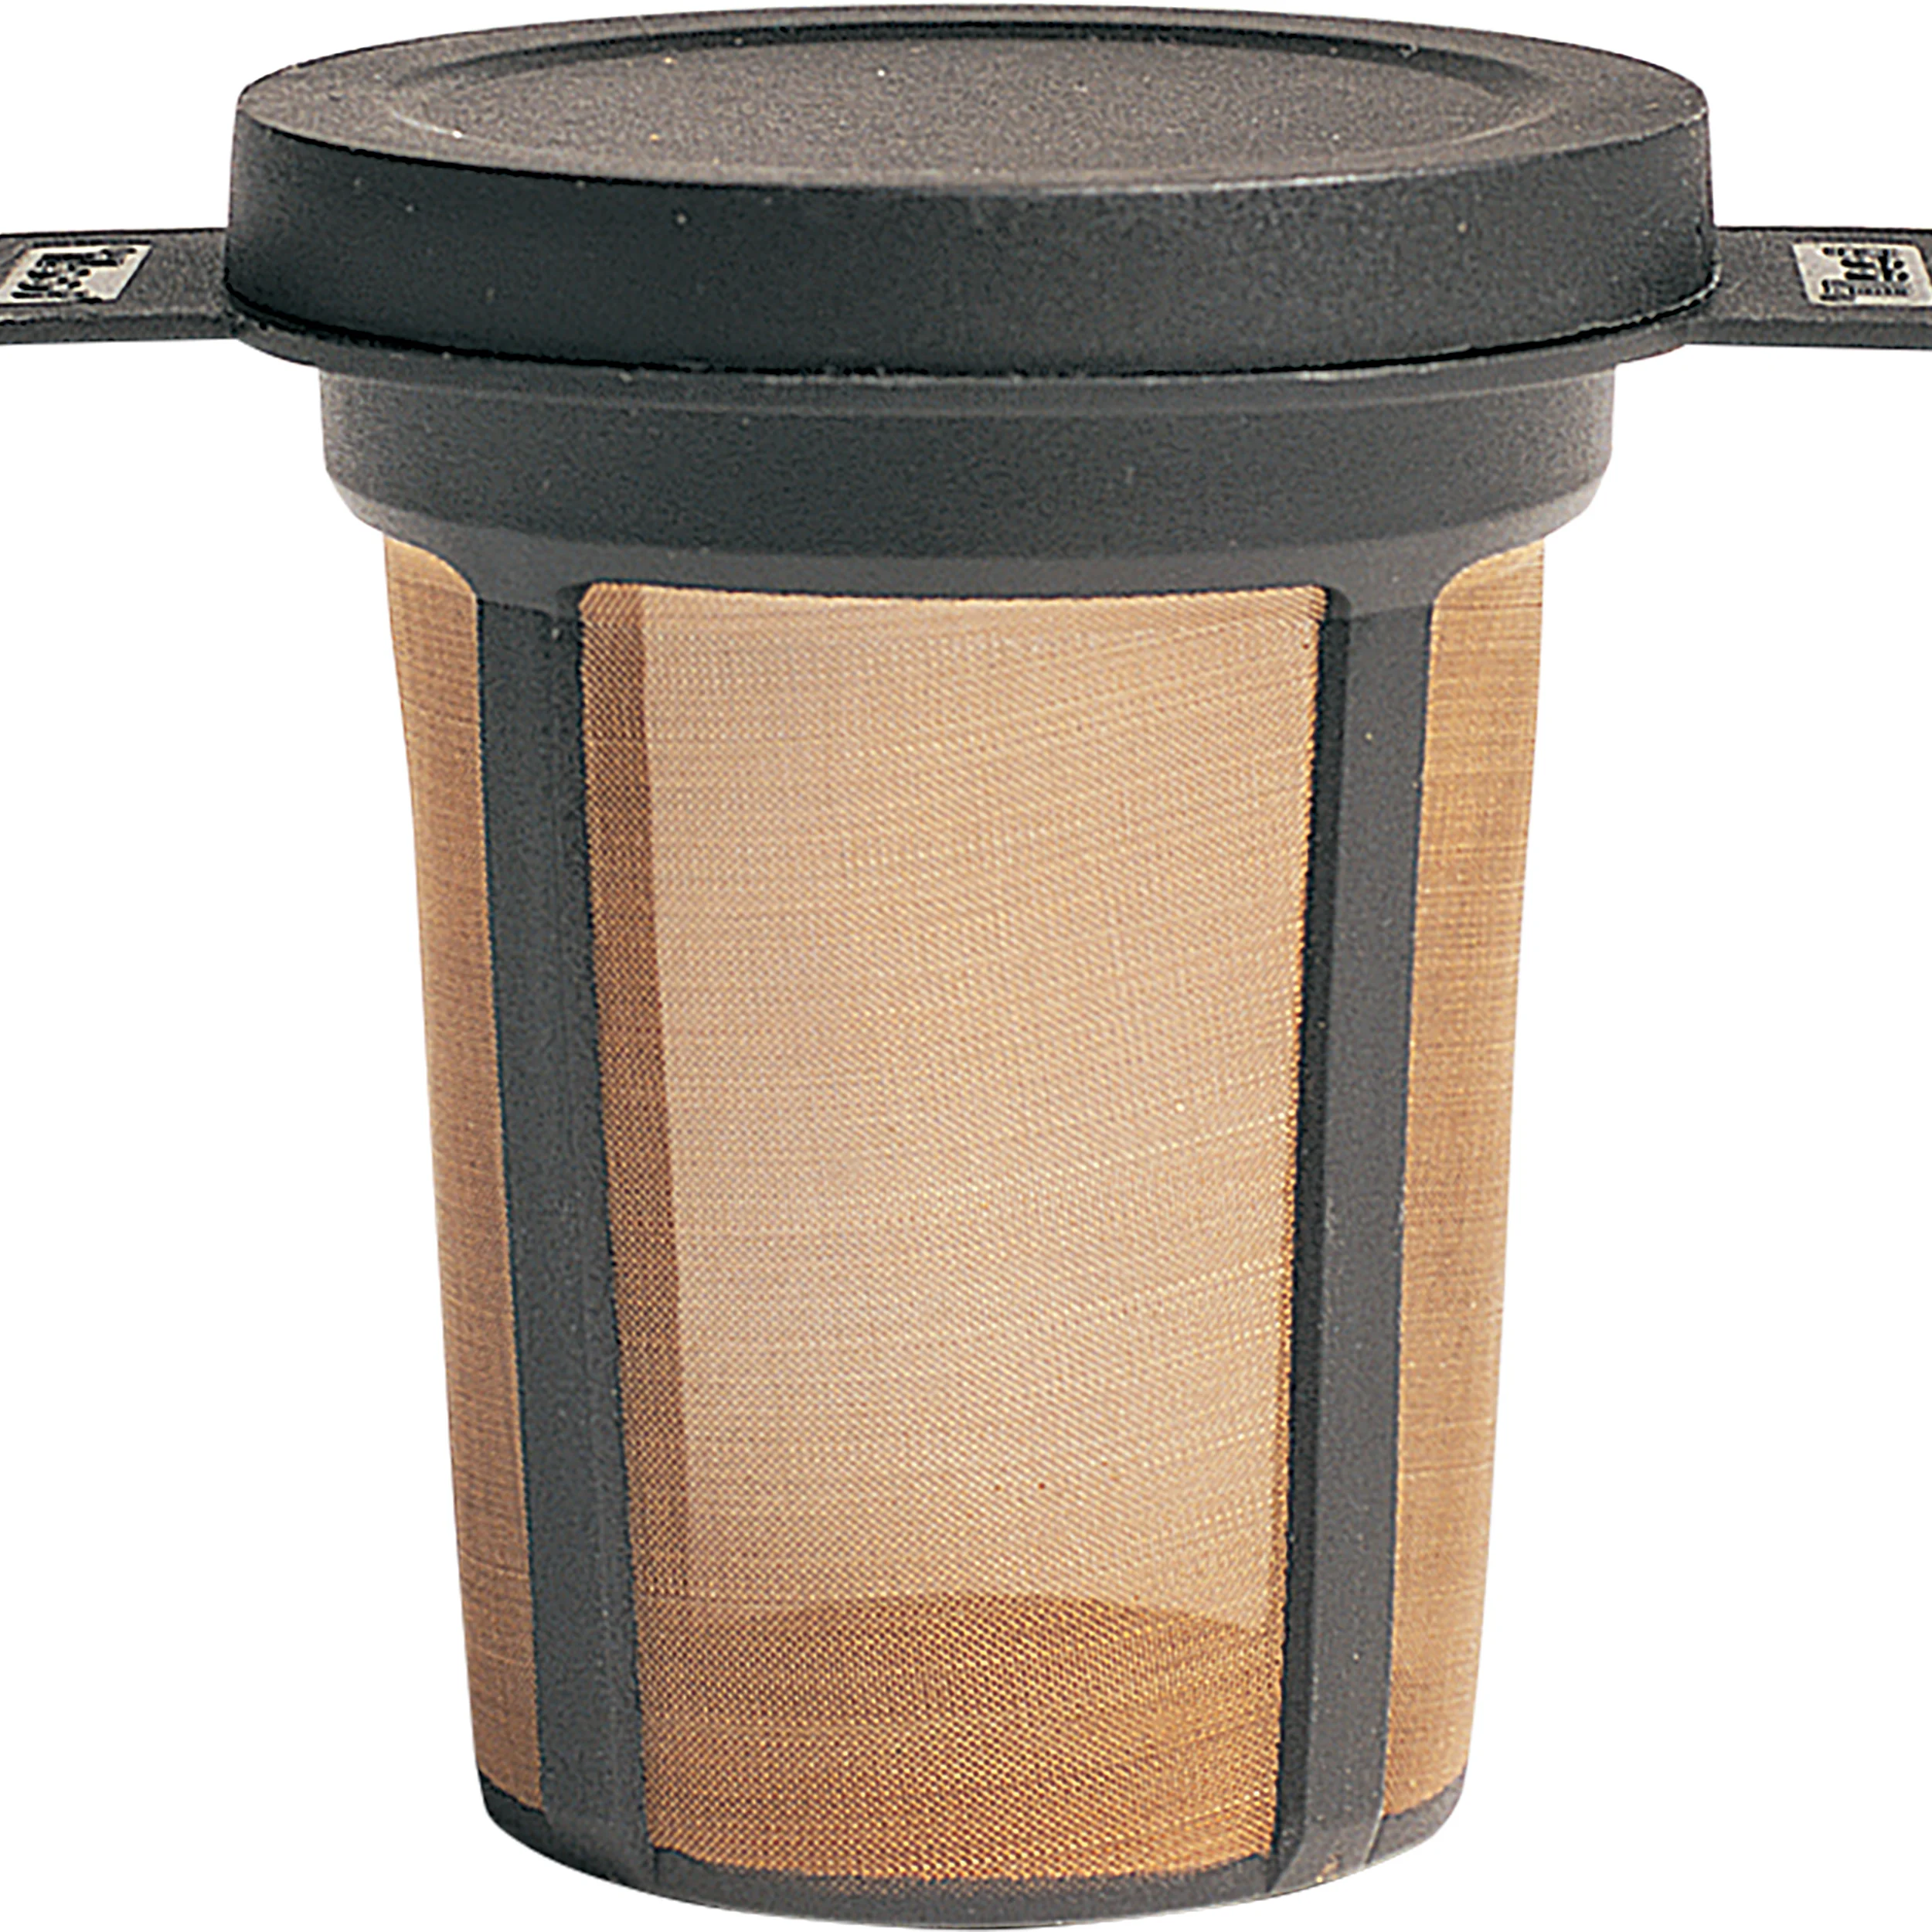 Best Reusable Coffee Filters: Top Reusable Filters for Coffee Makers